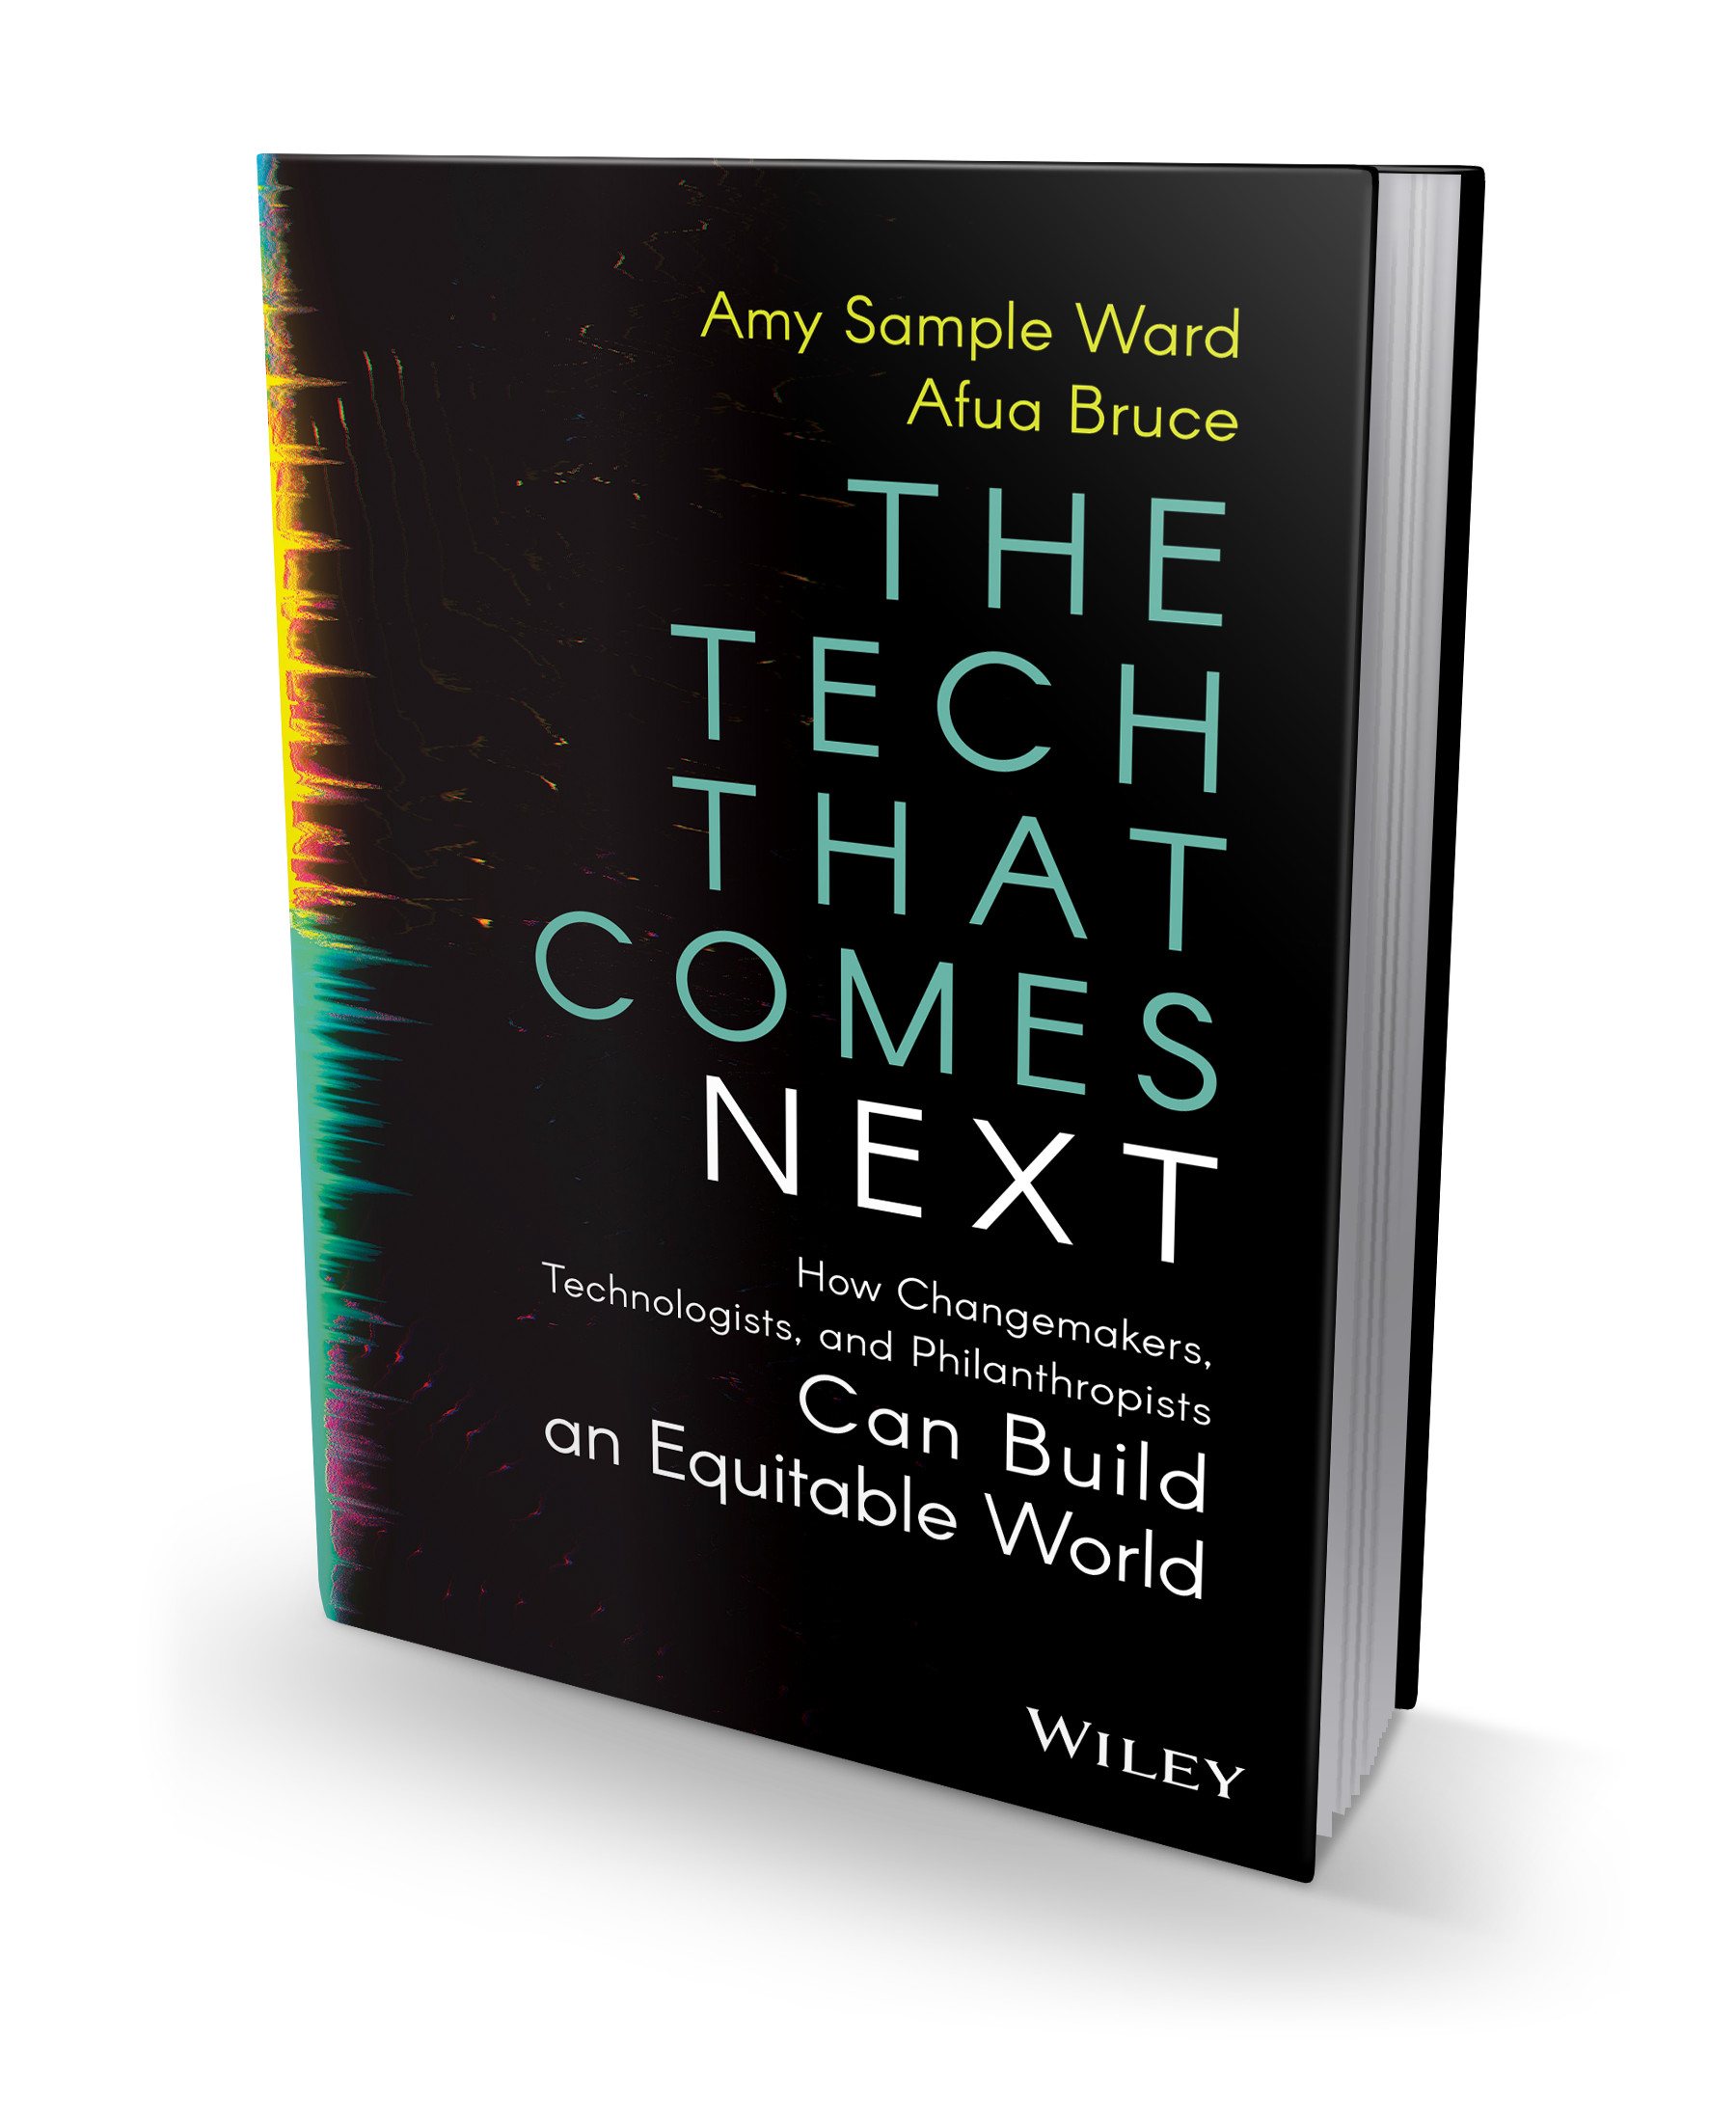 The Tech That Comes Next book title